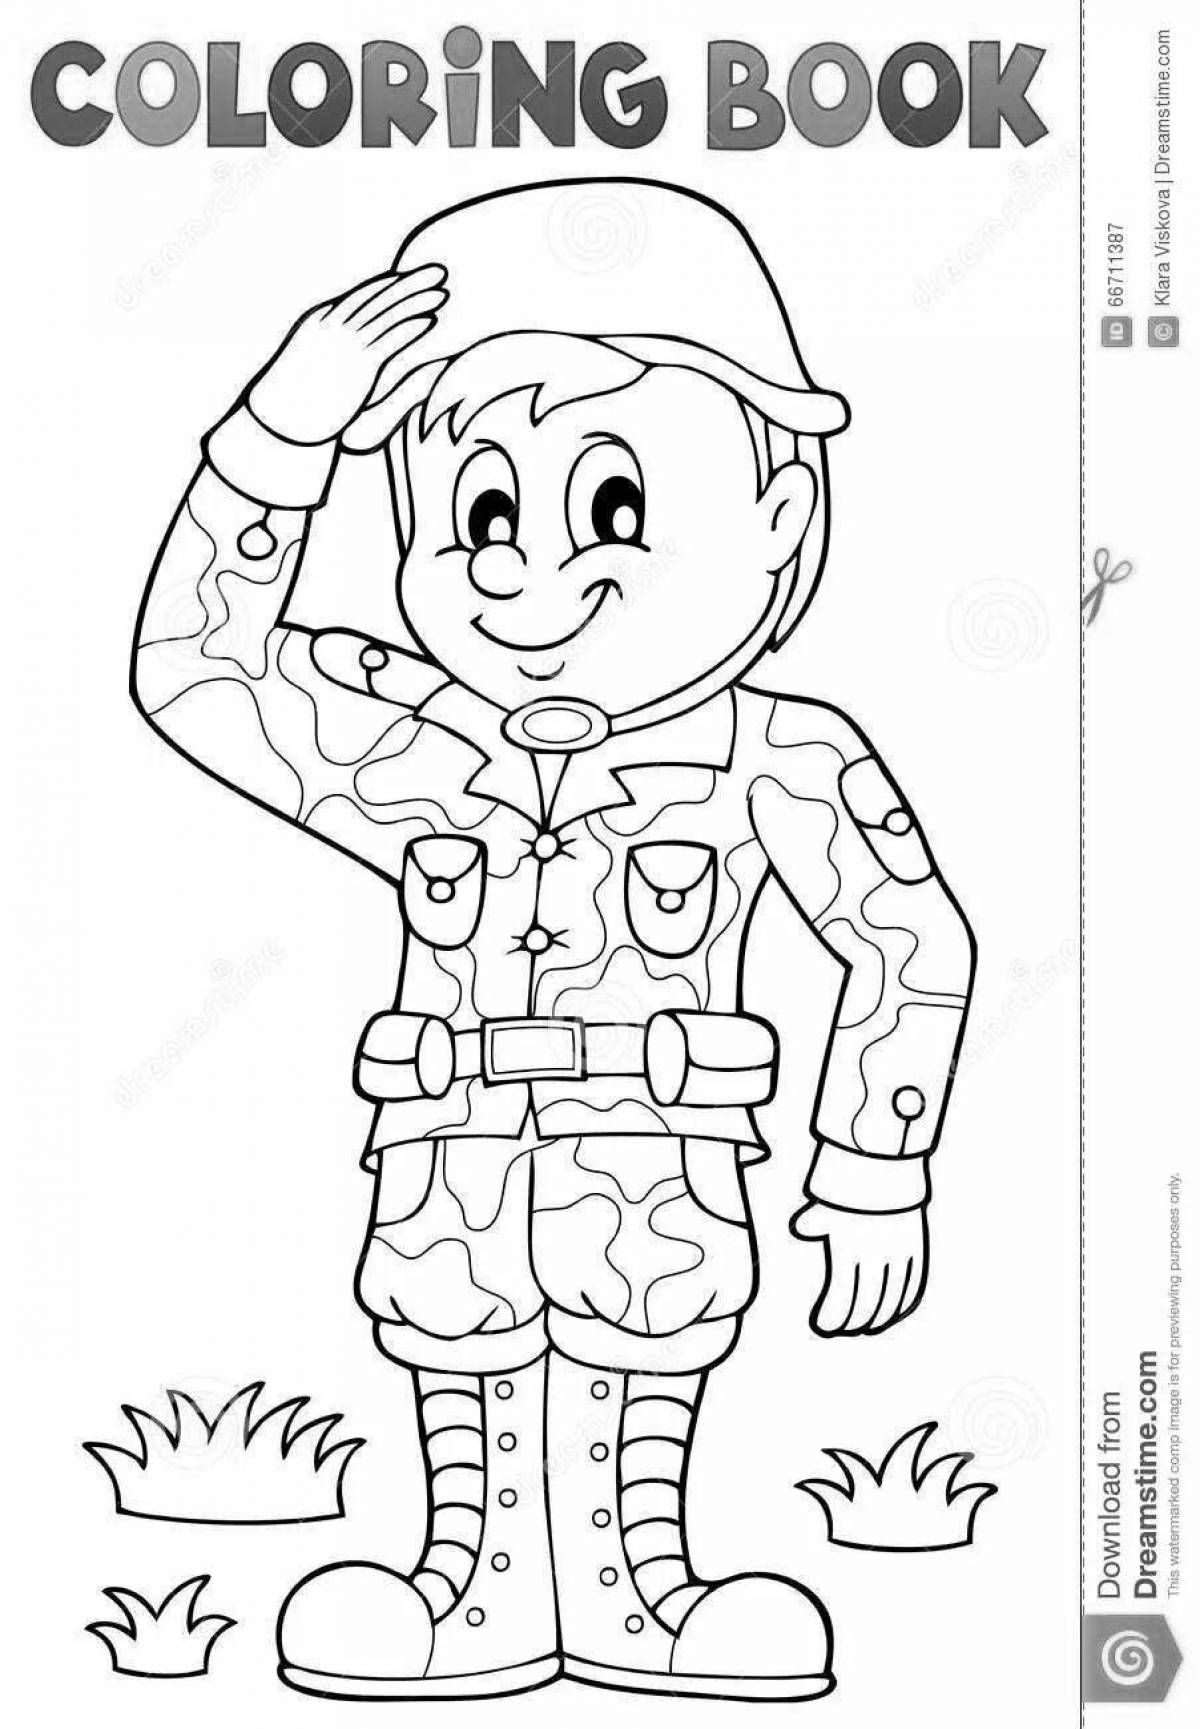 Fun coloring of soldiers for kids